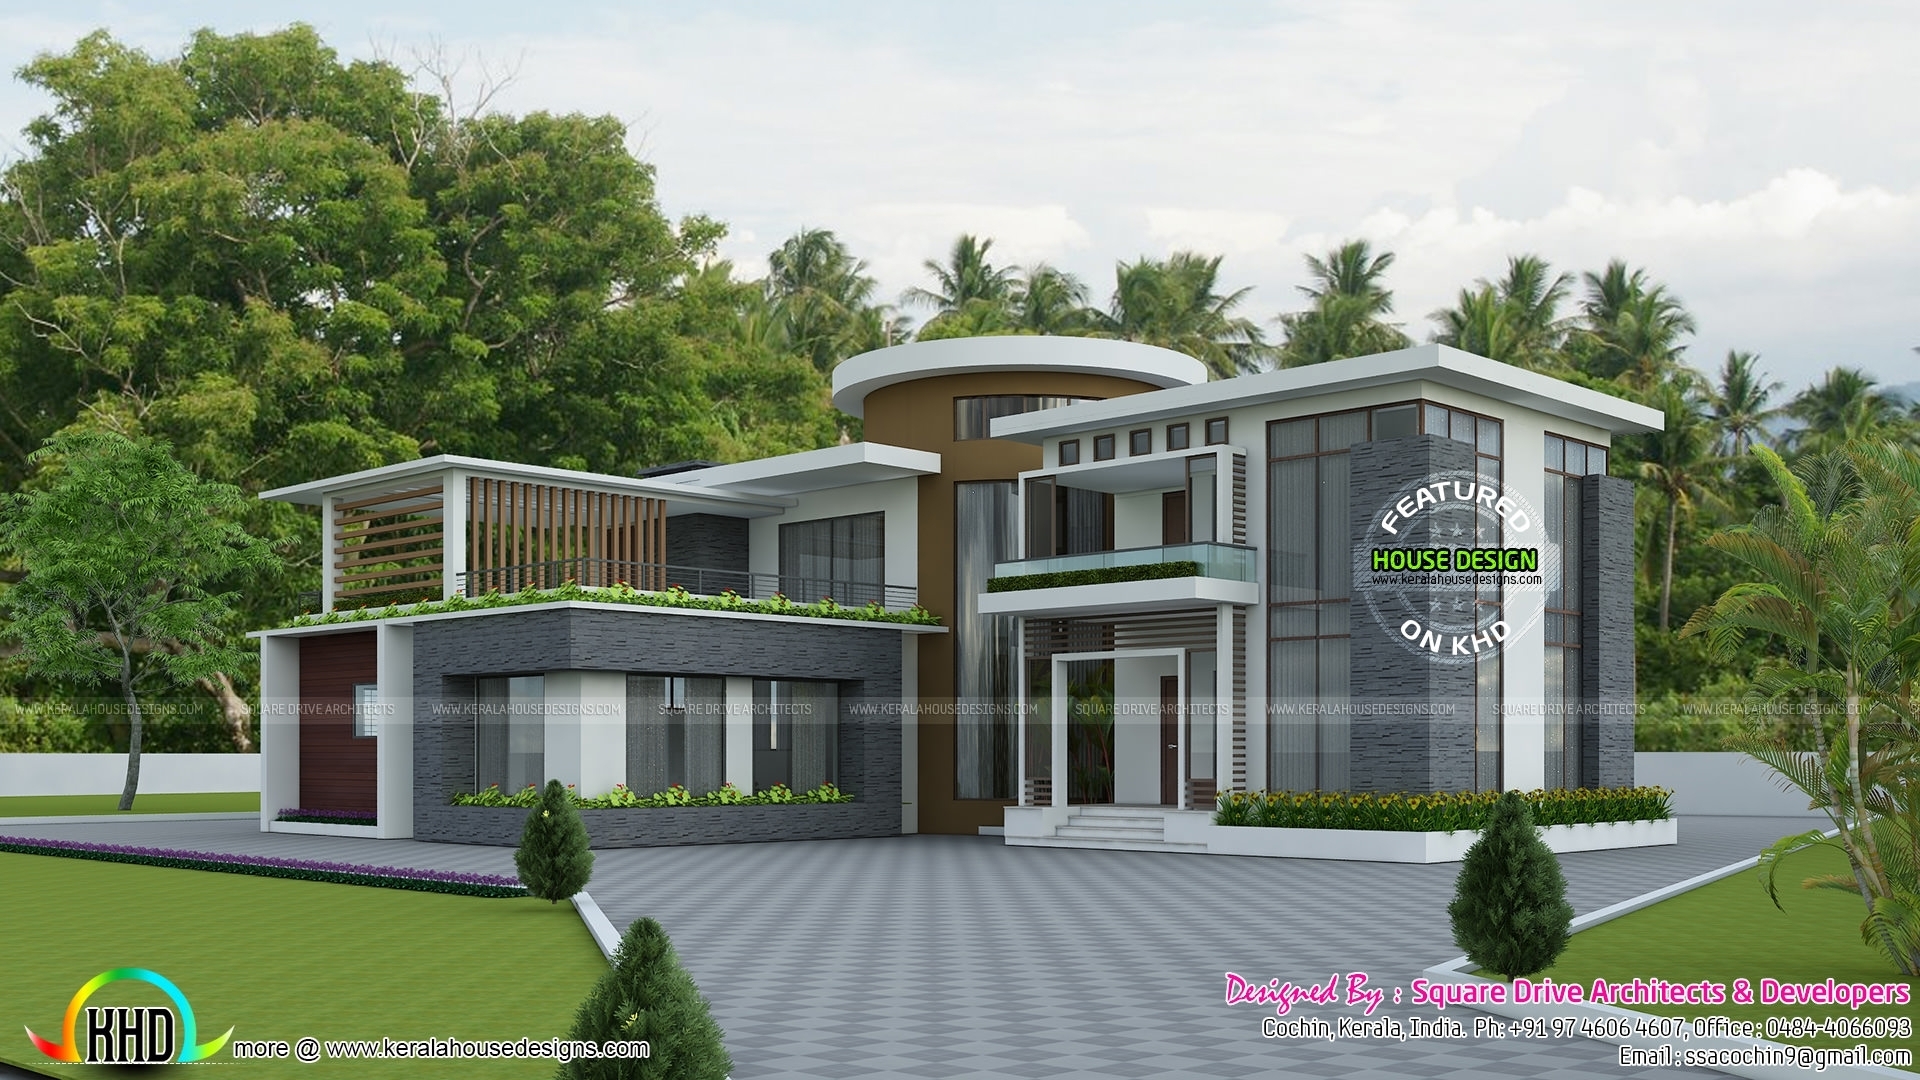 Rounded Roof Plans Modern Round Roof Mix House Plan Kerala Home with ...